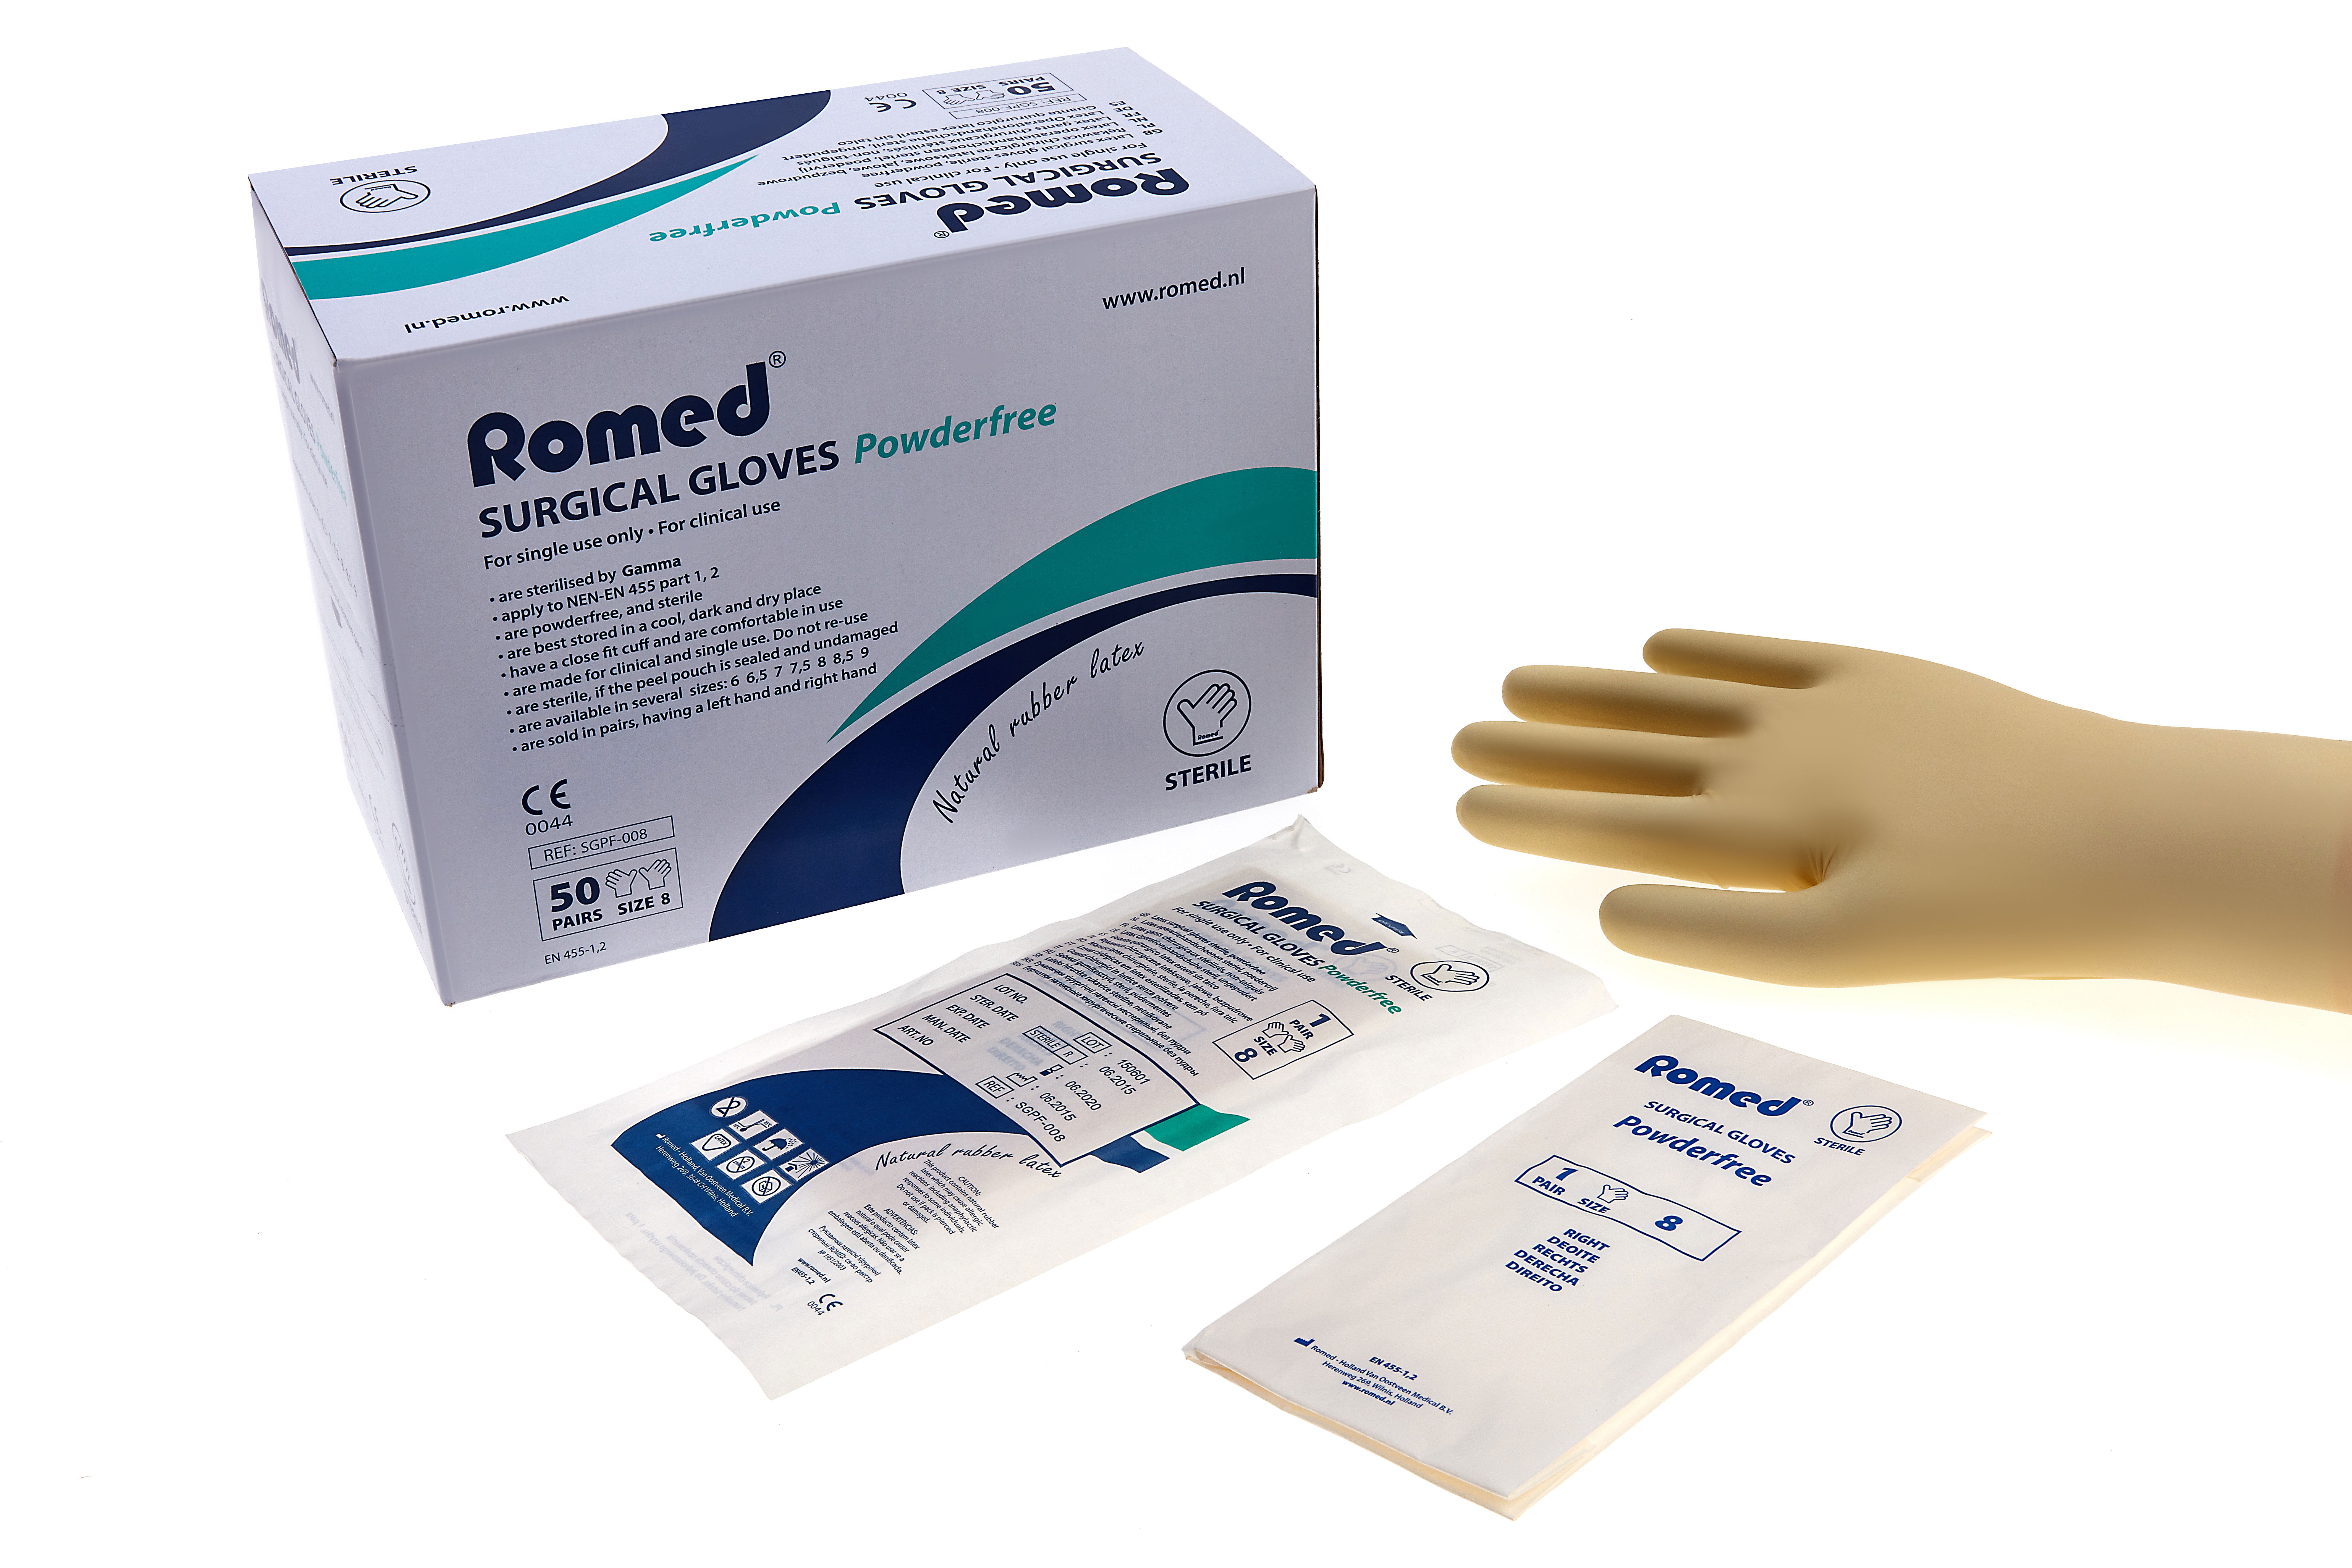 Latex surgical gloves, powderfree, sterile